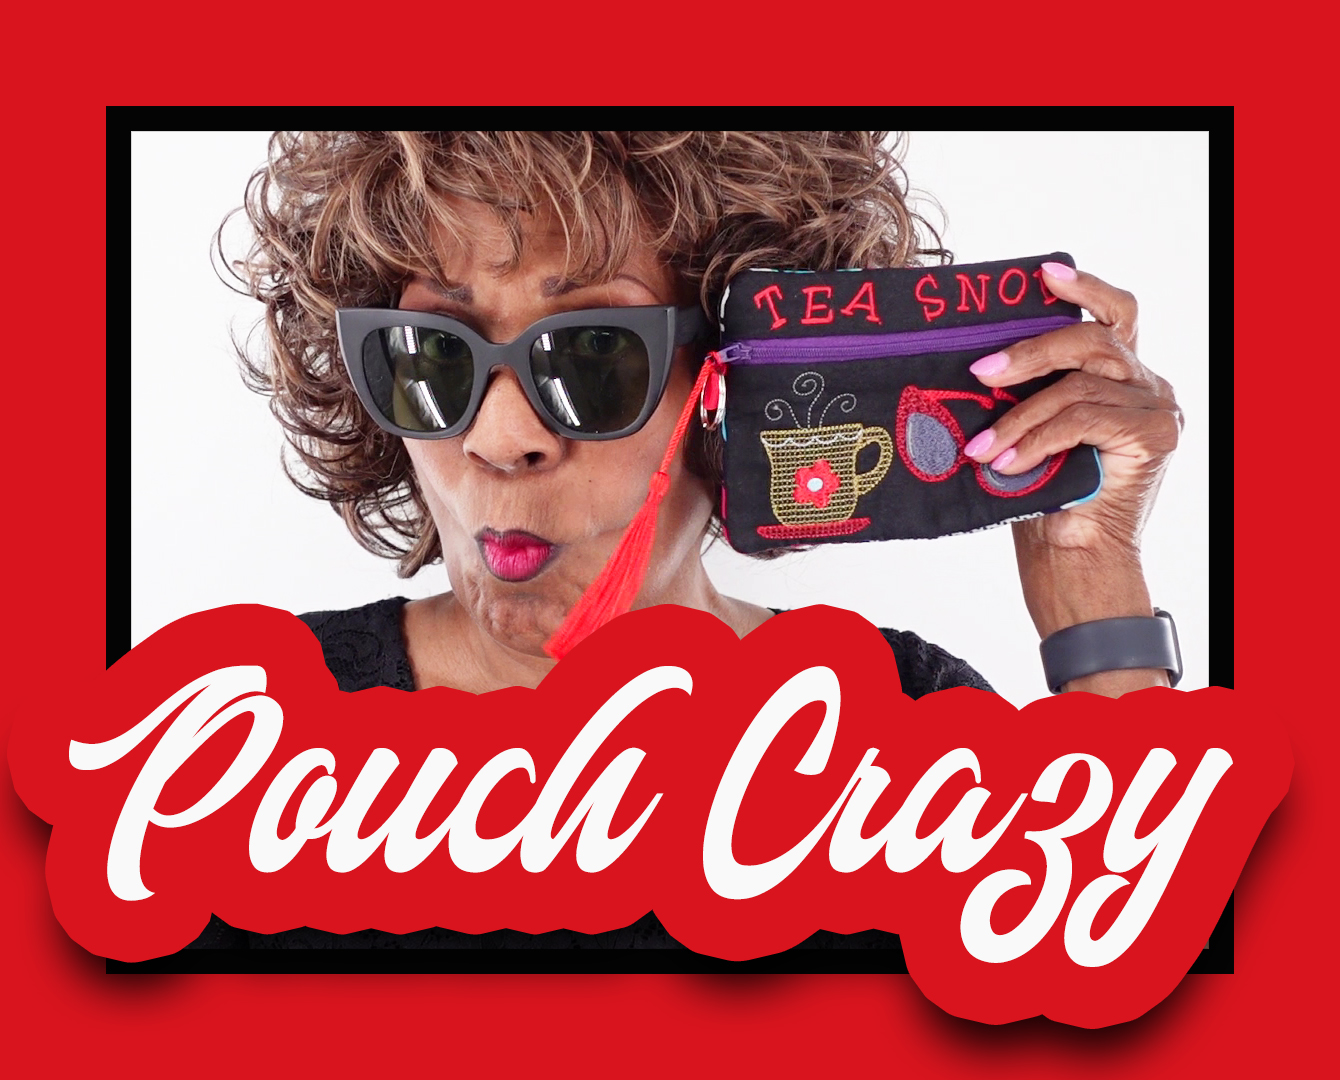 Click for Wambui's Pouch Crazy Store